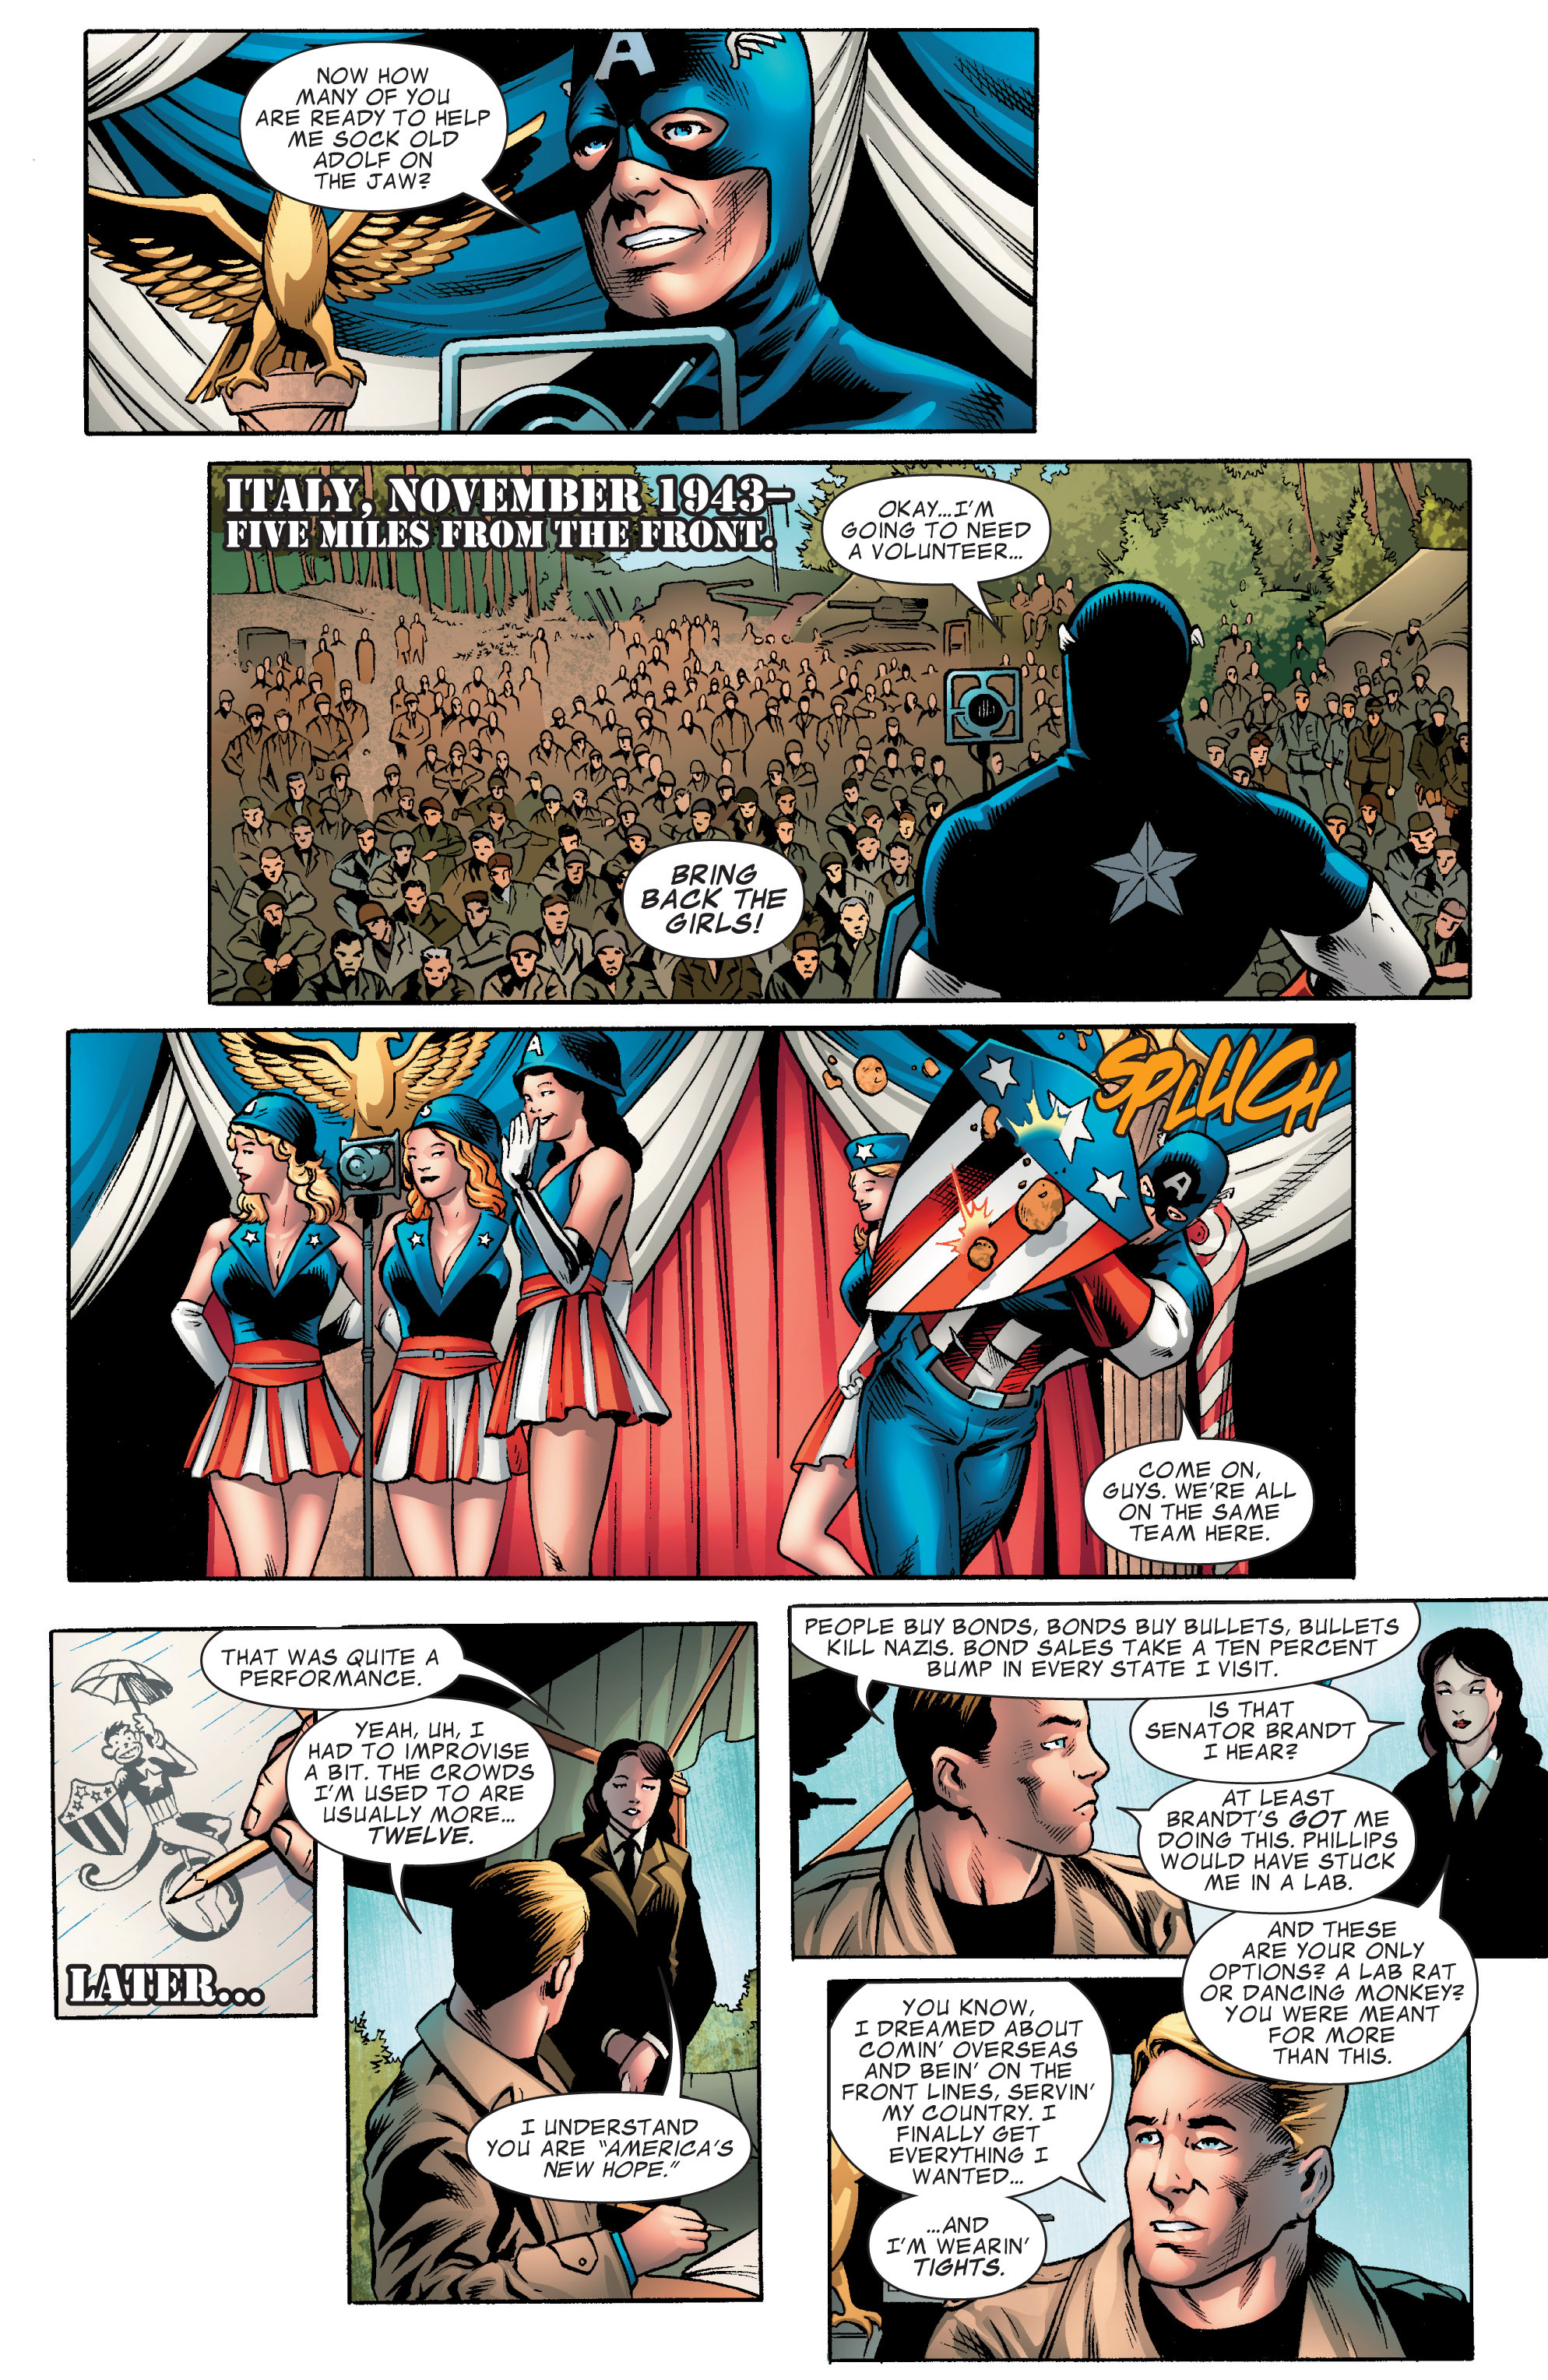 Captain America: The First Avenger Adaptation 1 Page 11